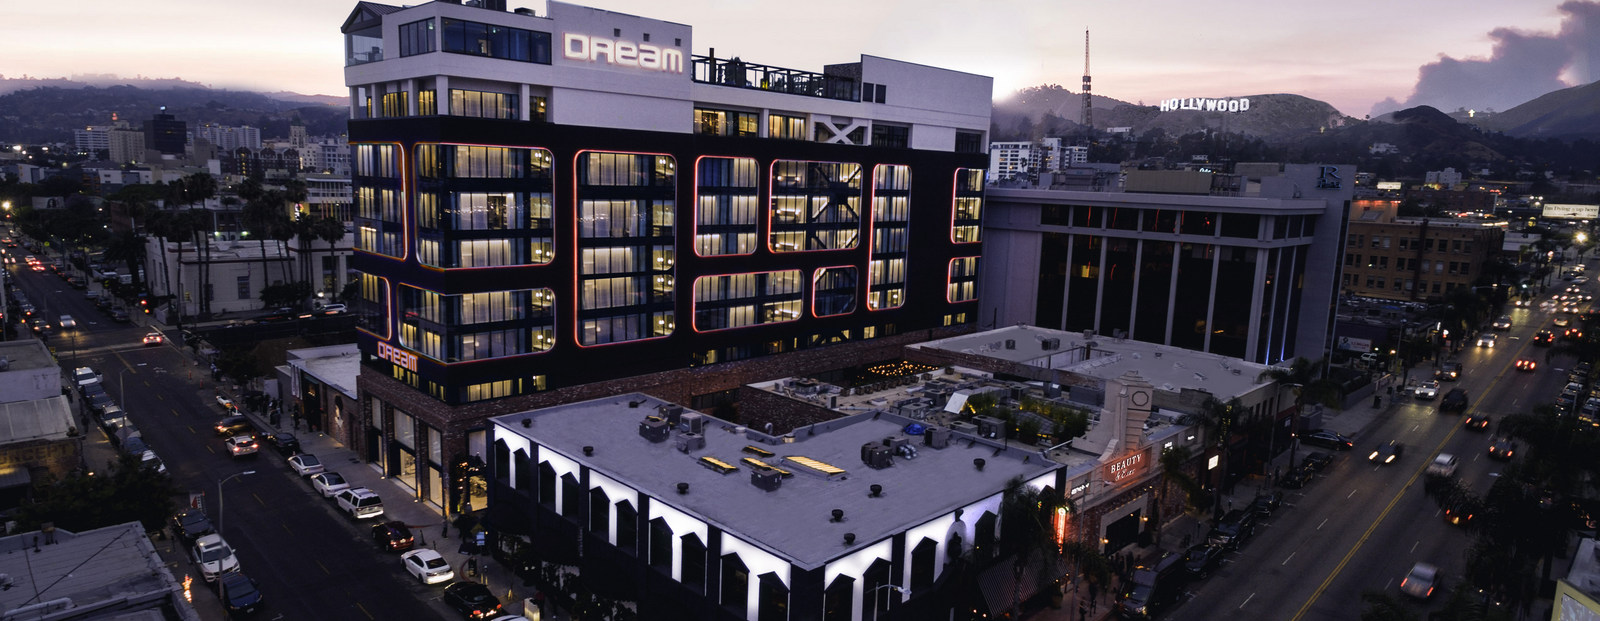 Dream Hotels opens Dream Hotel Los Angeles Hollywood - What's Shakin' week of July 10